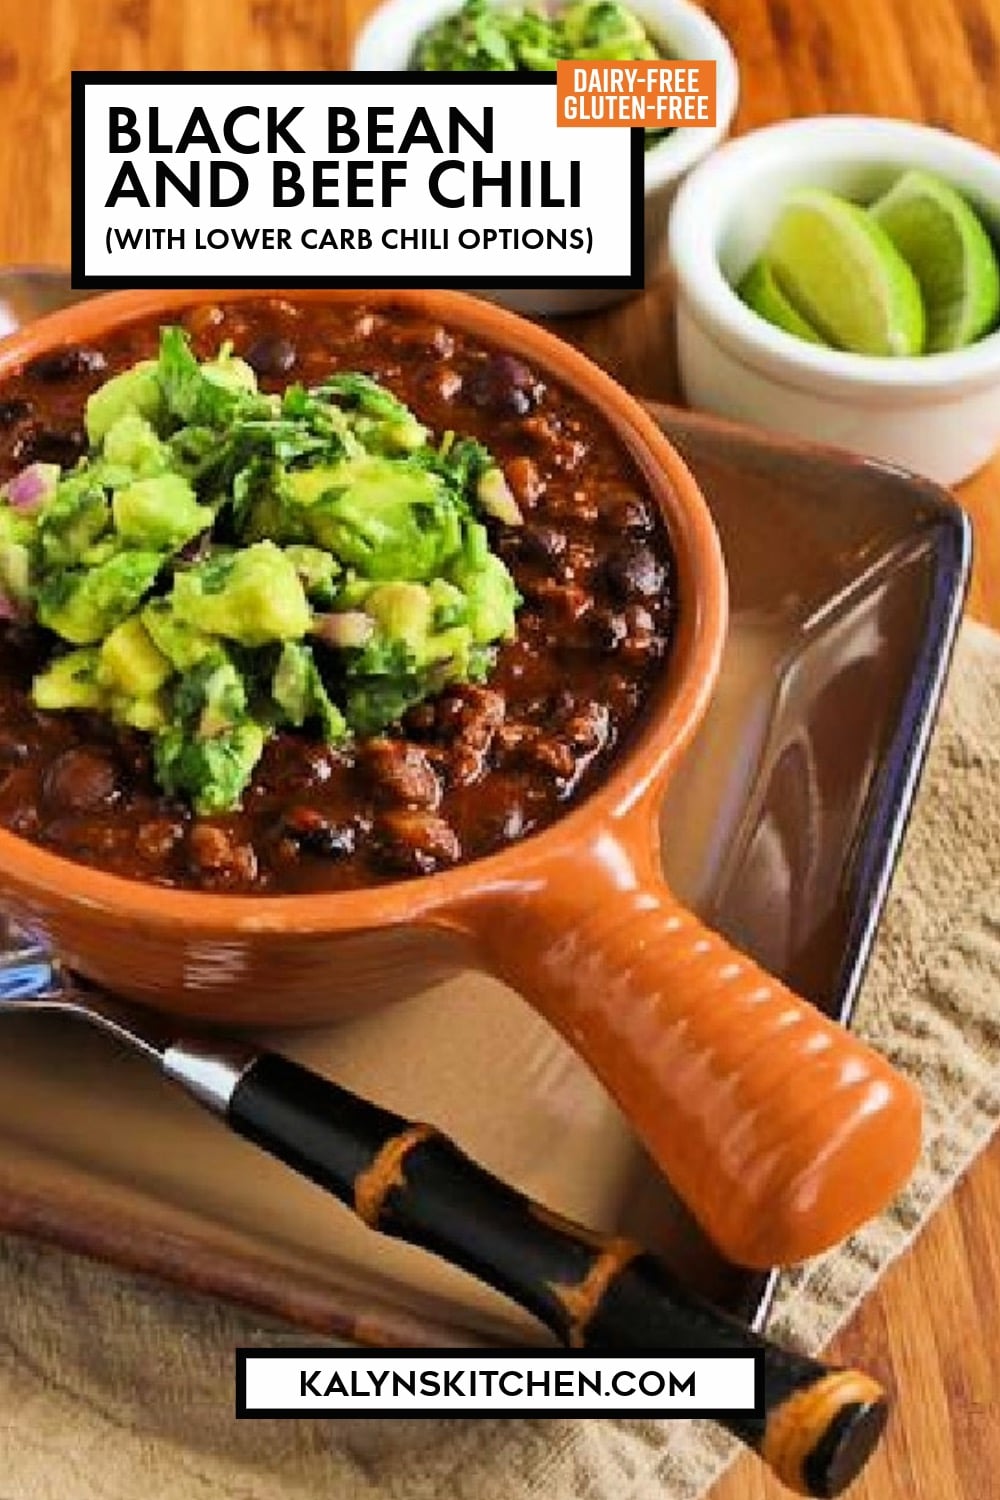 Pinterest image of Black Bean and Beef Chili